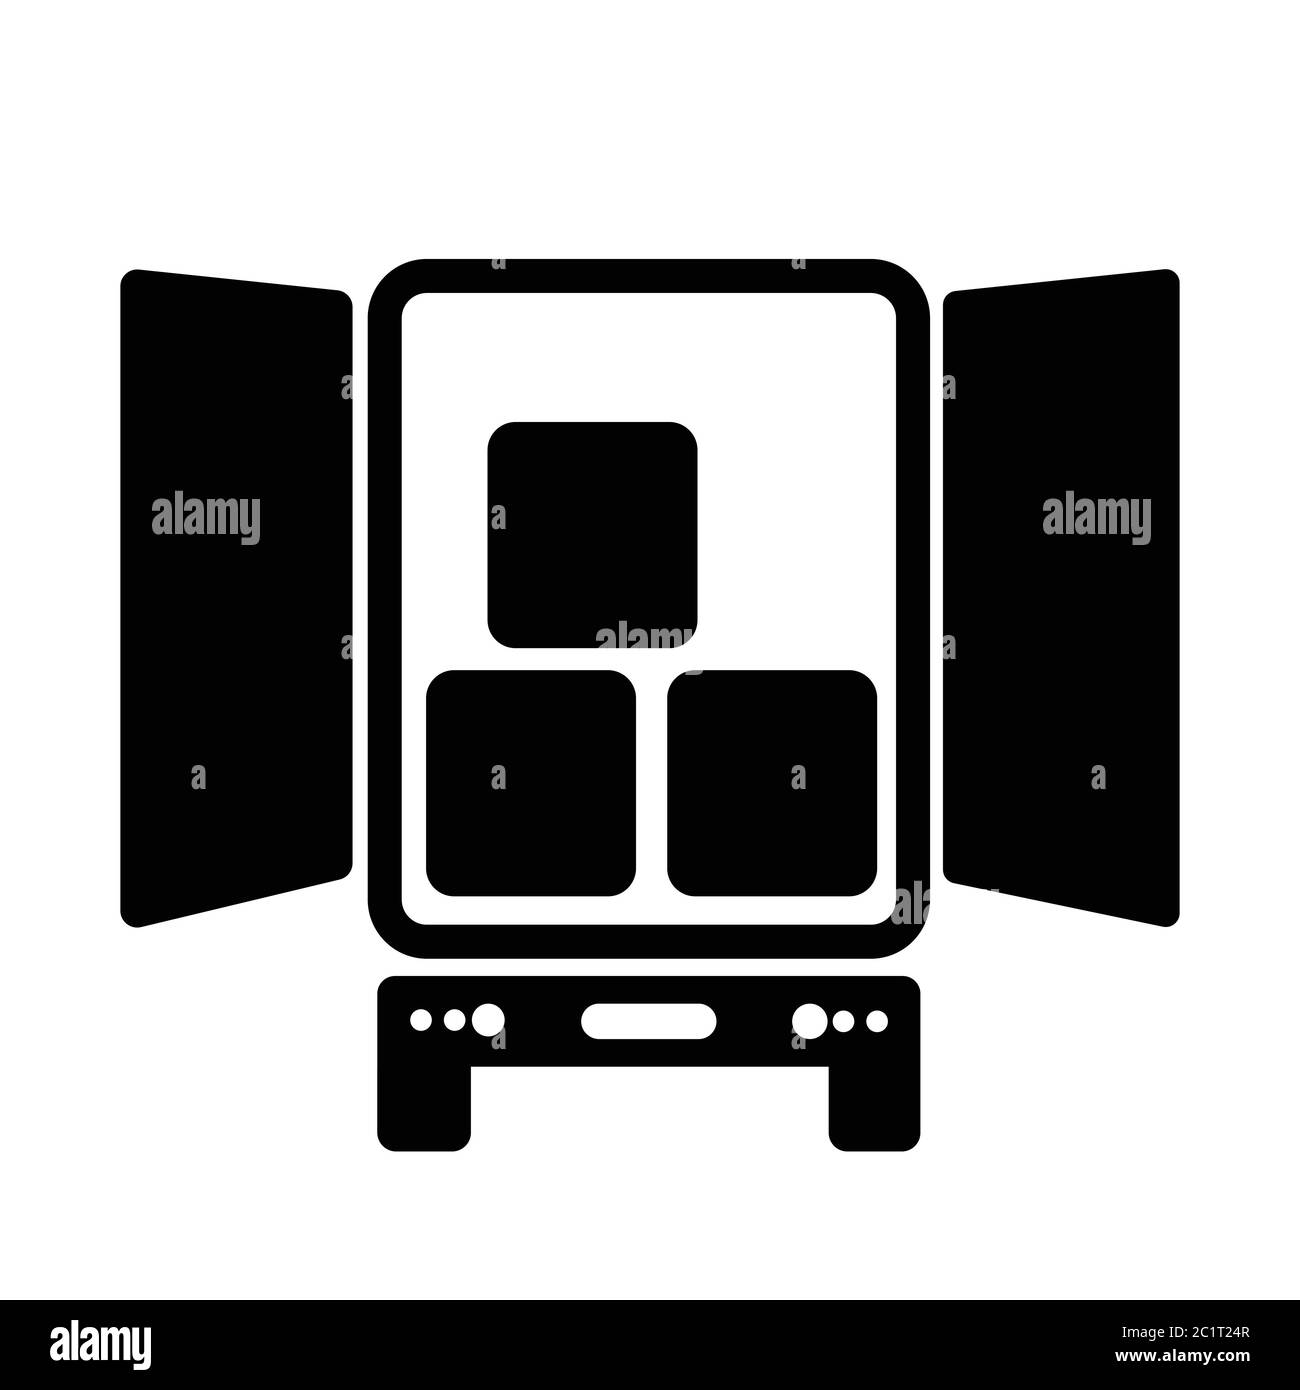 Opened Delivery Truck with Boxes Inside. Black Illustration Isolated on a White Background. EPS Vector Stock Vector